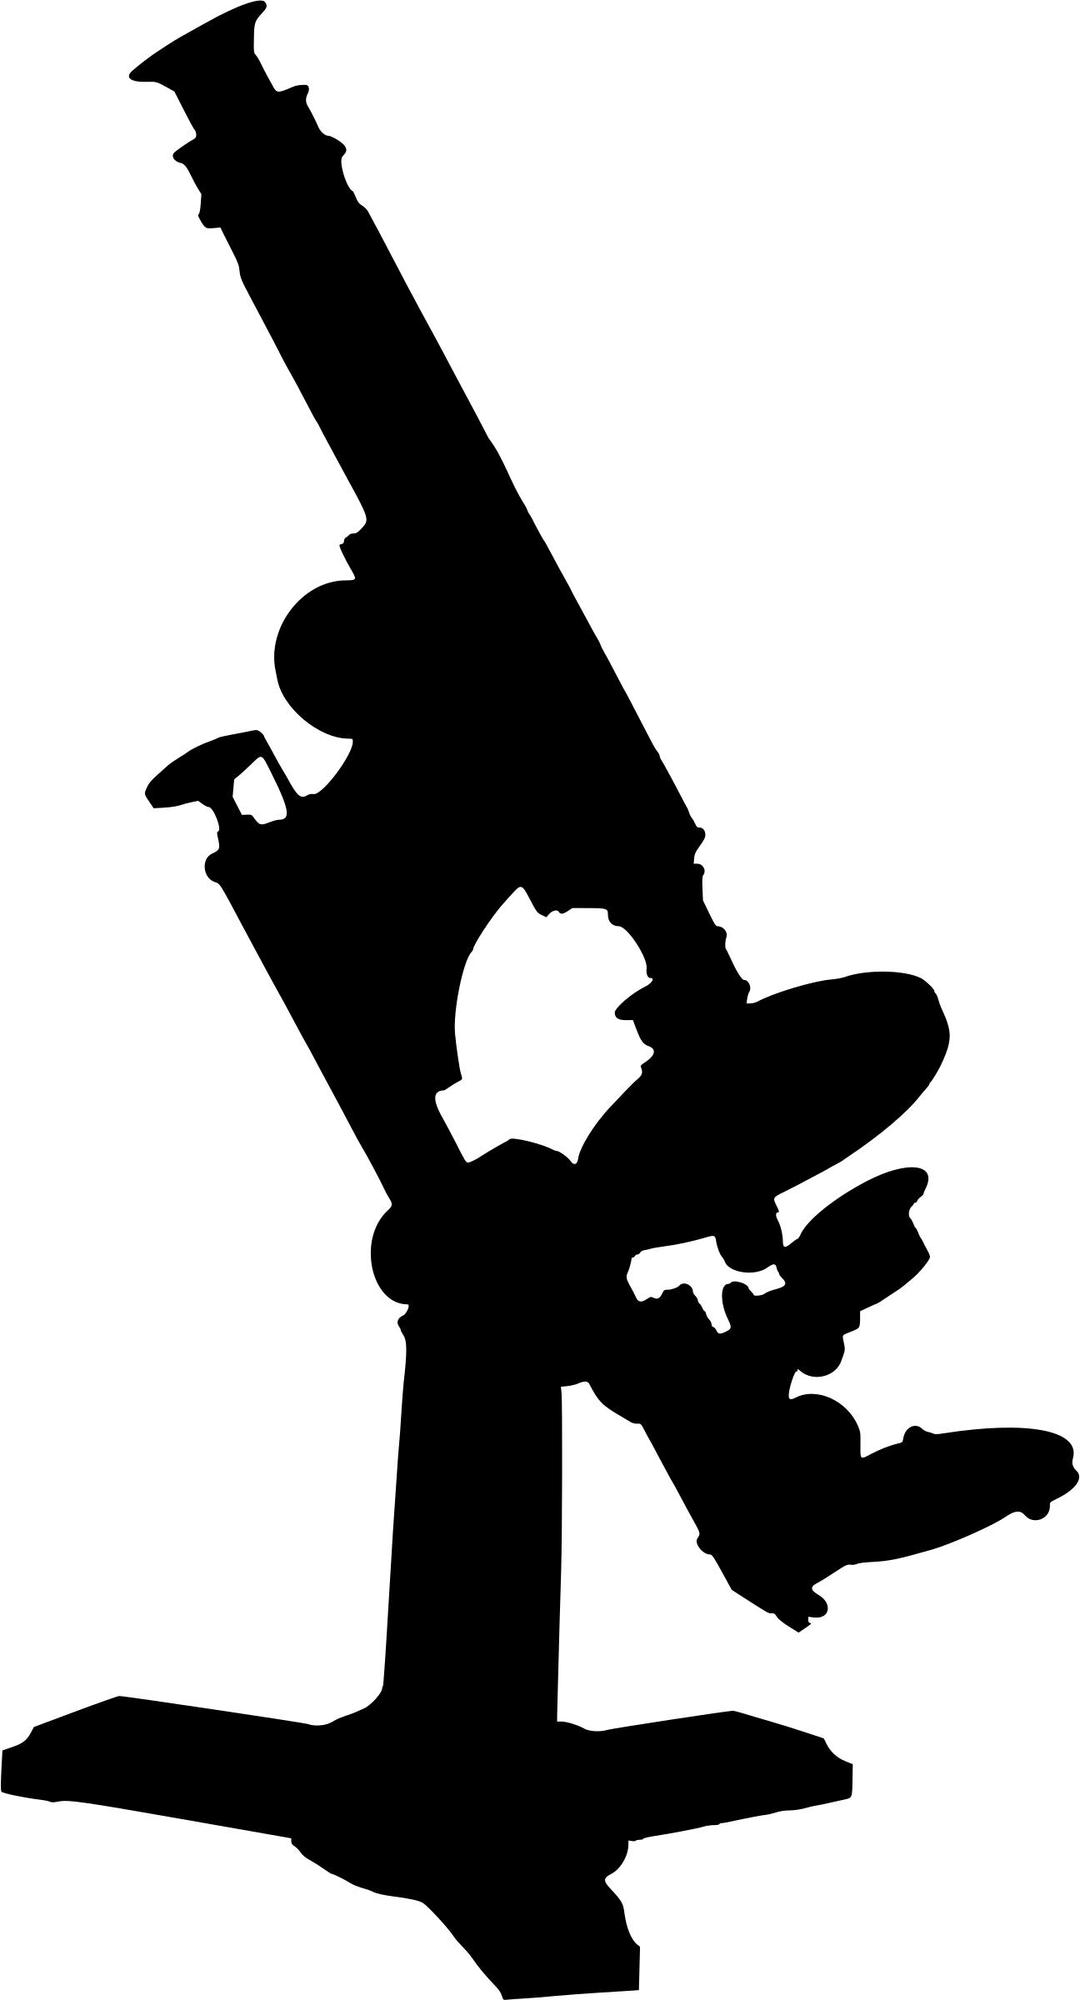 Microscope Silhouette png transparent